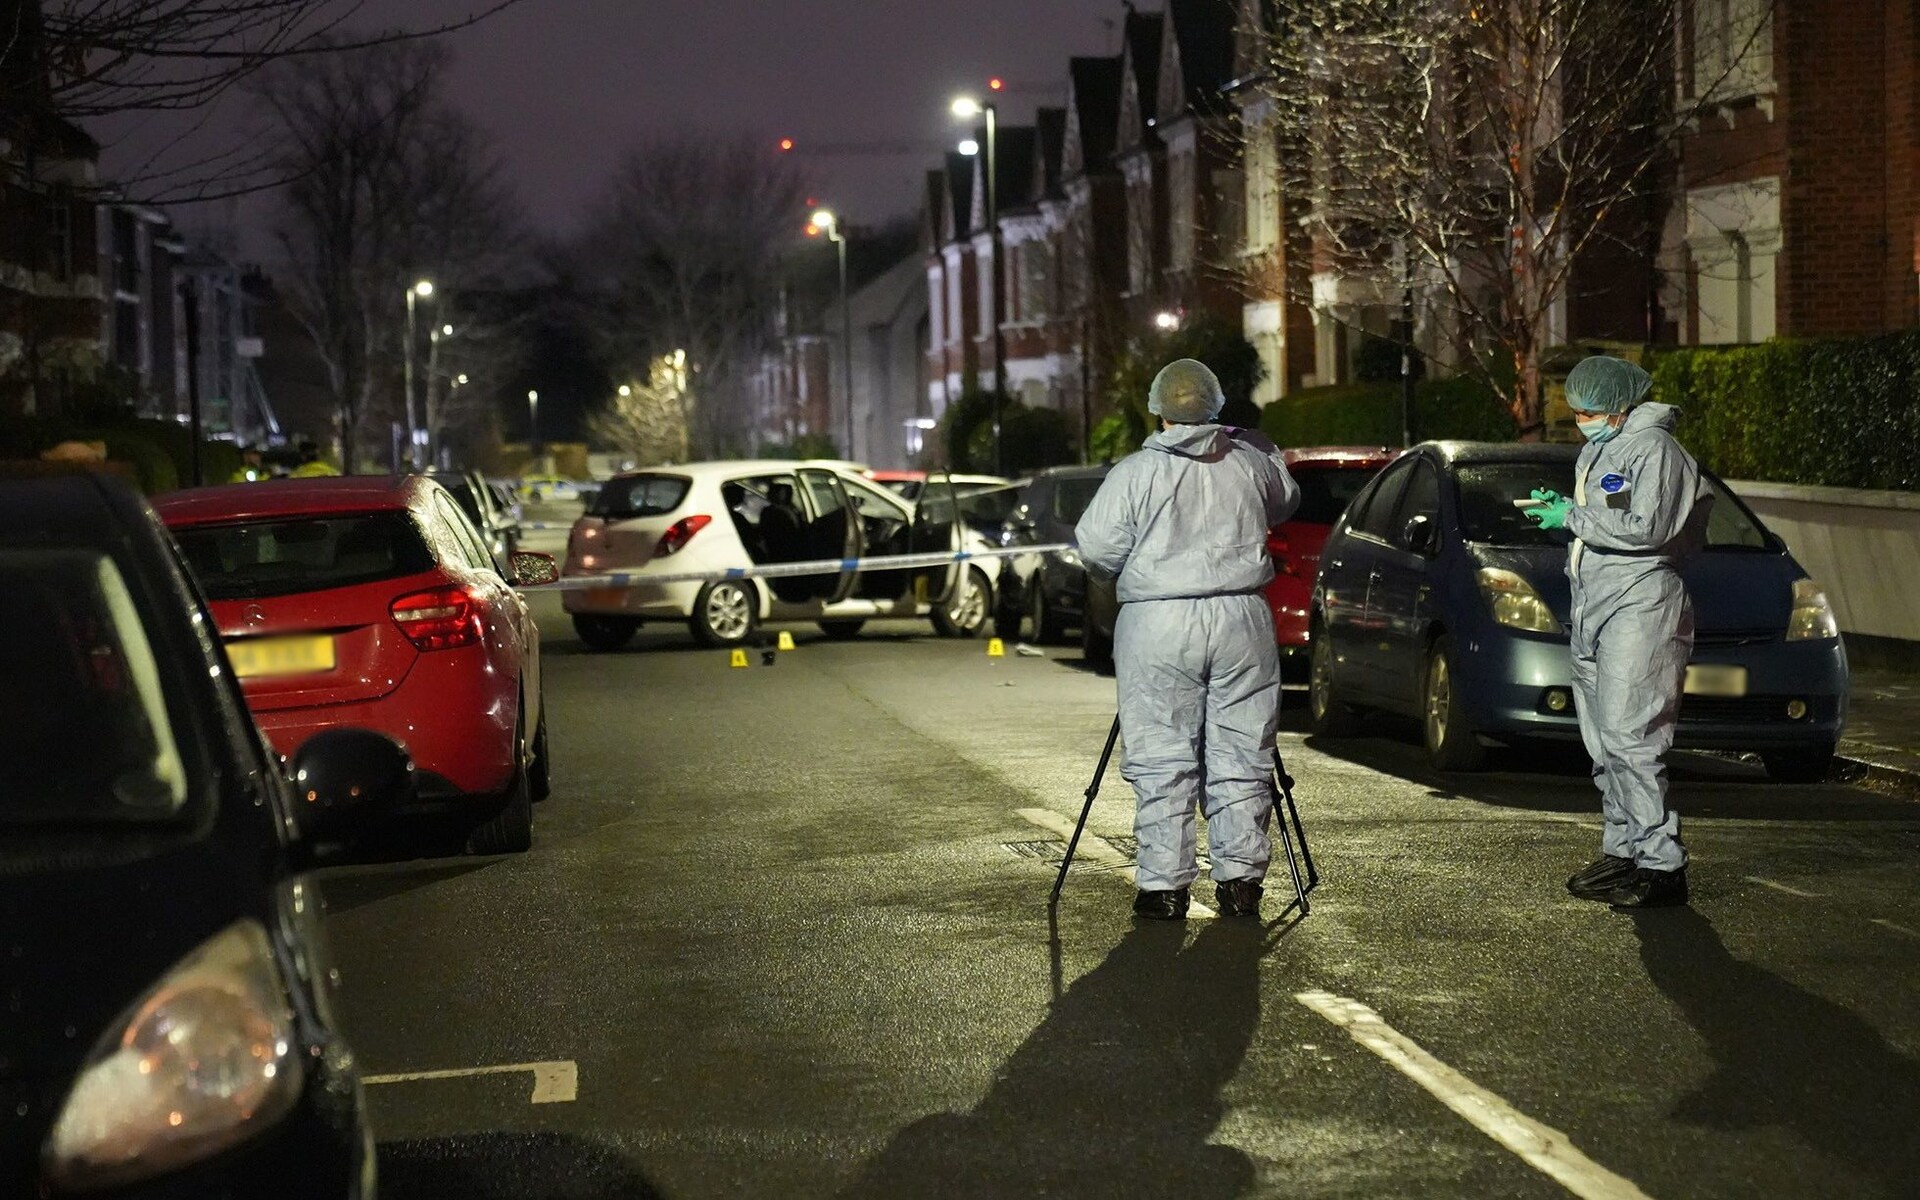 9 Injured in South London after alleged 'Substance' attack